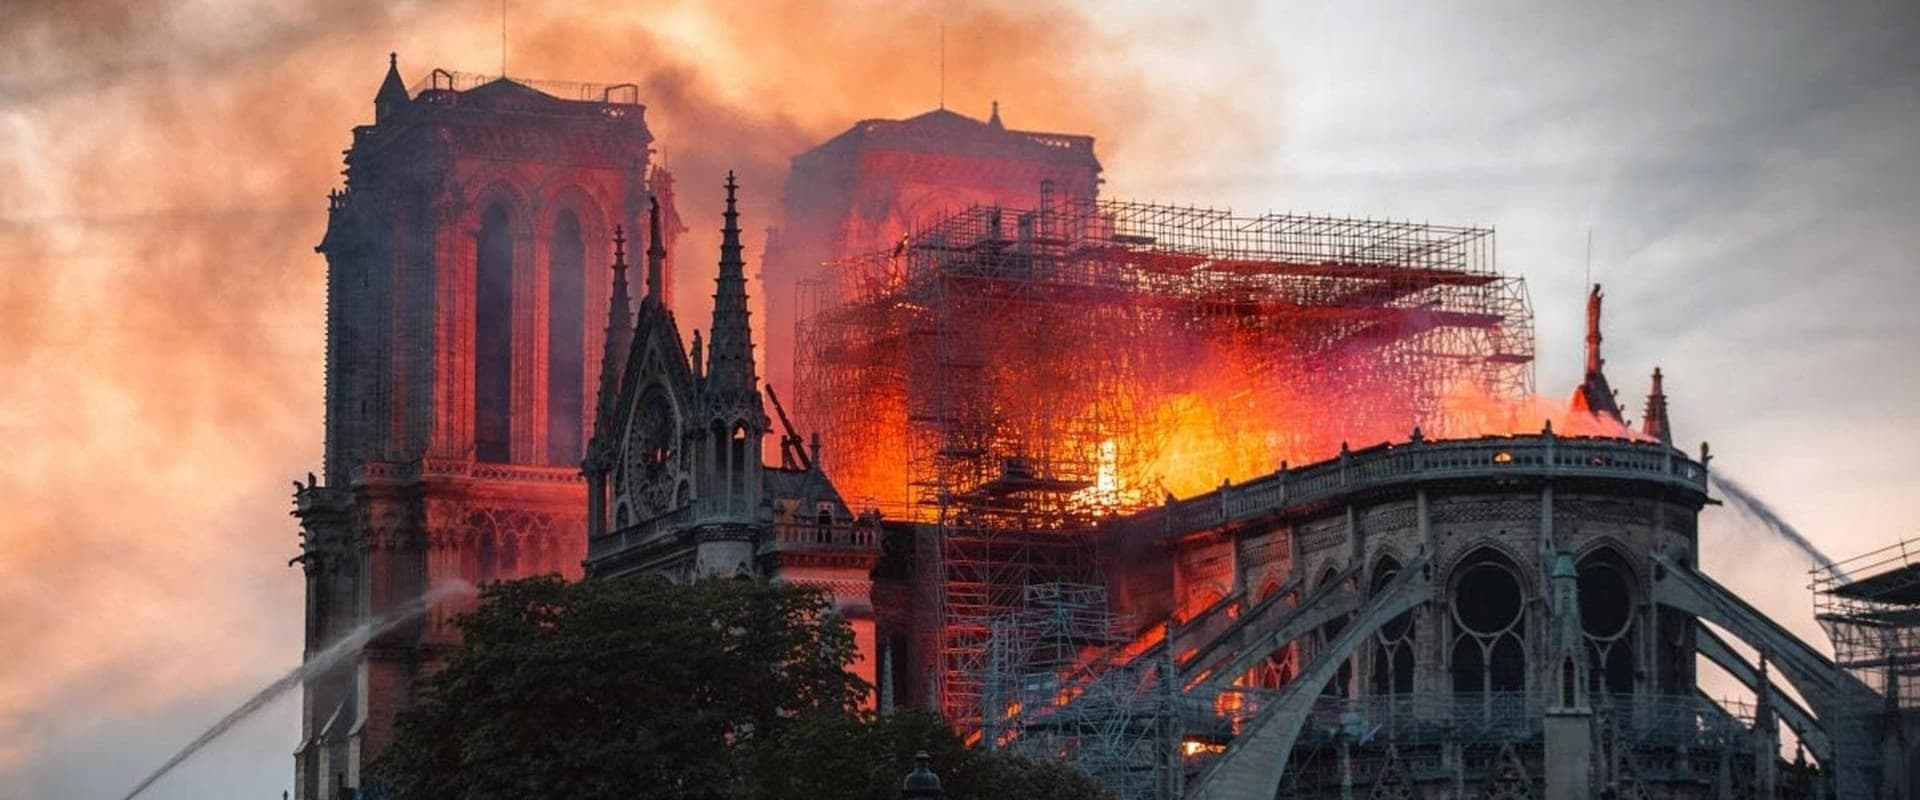 Notre-Dame on Fire